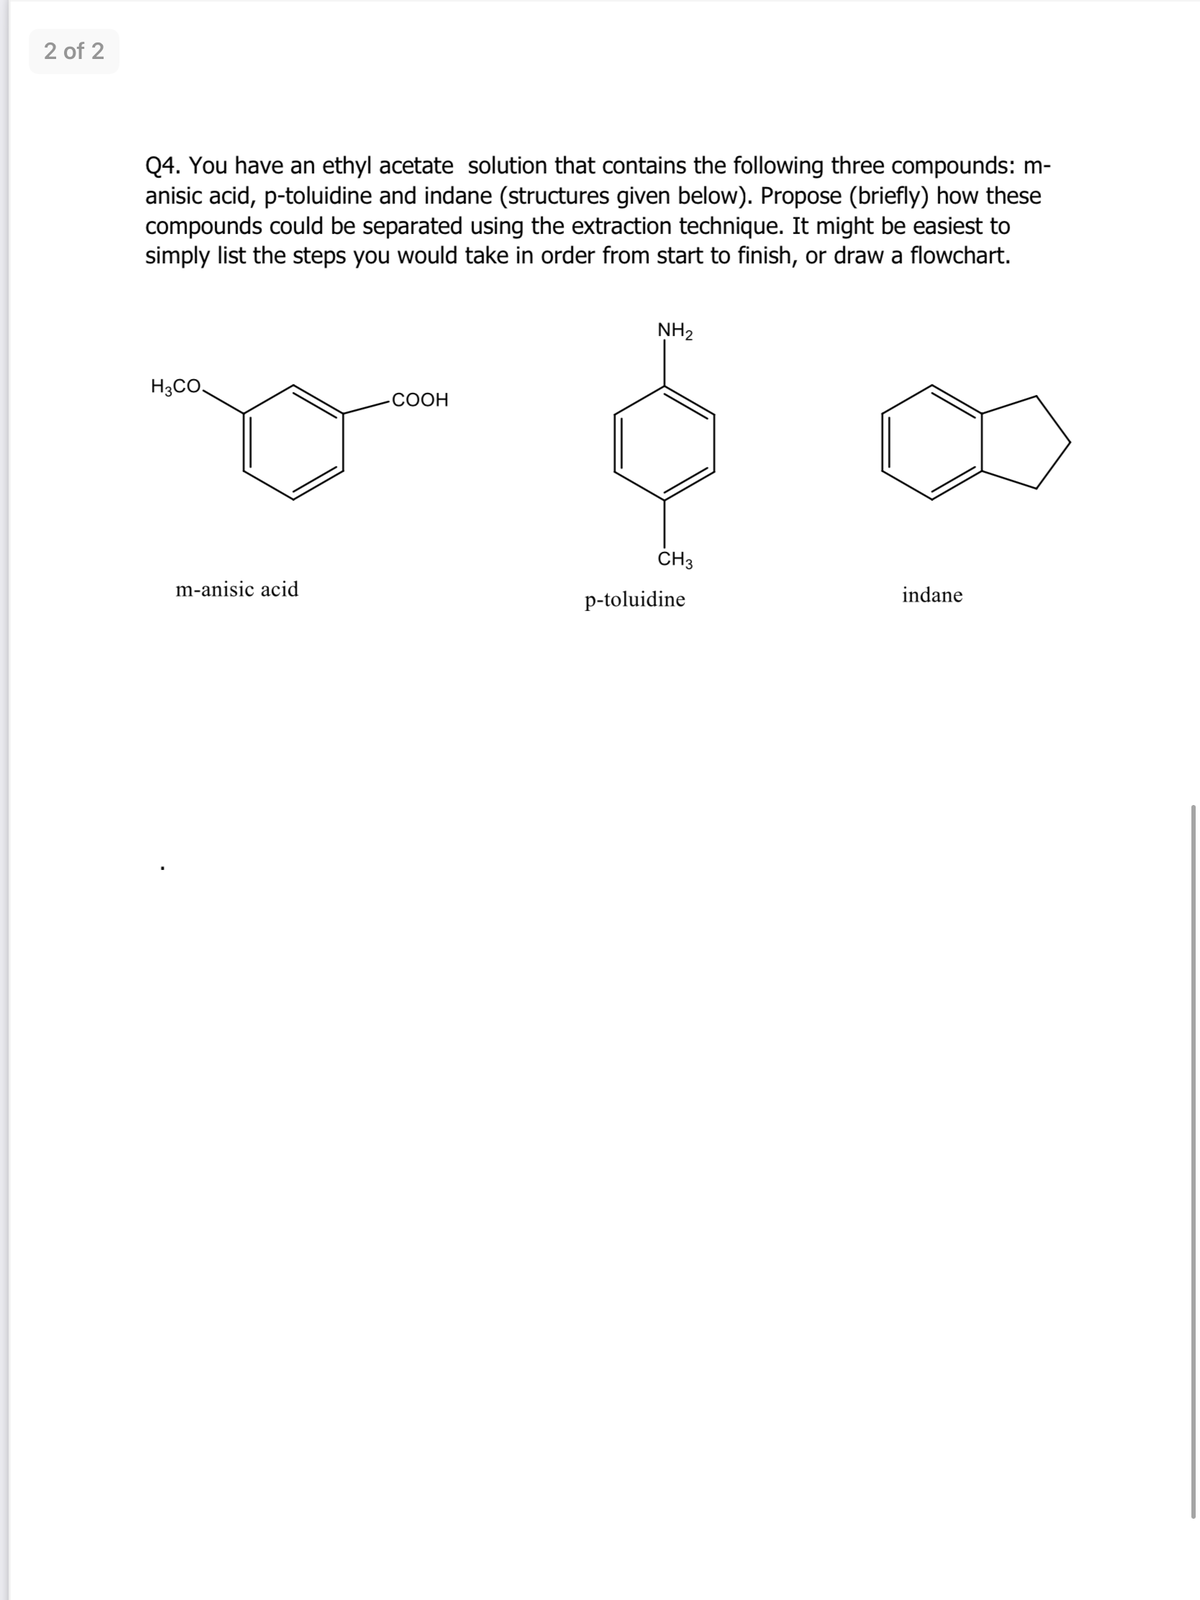 2 of 2
Q4. You have an ethyl acetate solution that contains the following three compounds: m-
anisic acid, p-toluidine and indane (structures given below). Propose (briefly) how these
compounds could be separated using the extraction technique. It might be easiest to
simply list the steps you would take in order from start to finish, or draw a flowchart.
NH2
H3CO.
СООН
ČH3
m-anisic acid
indane
p-toluidine
